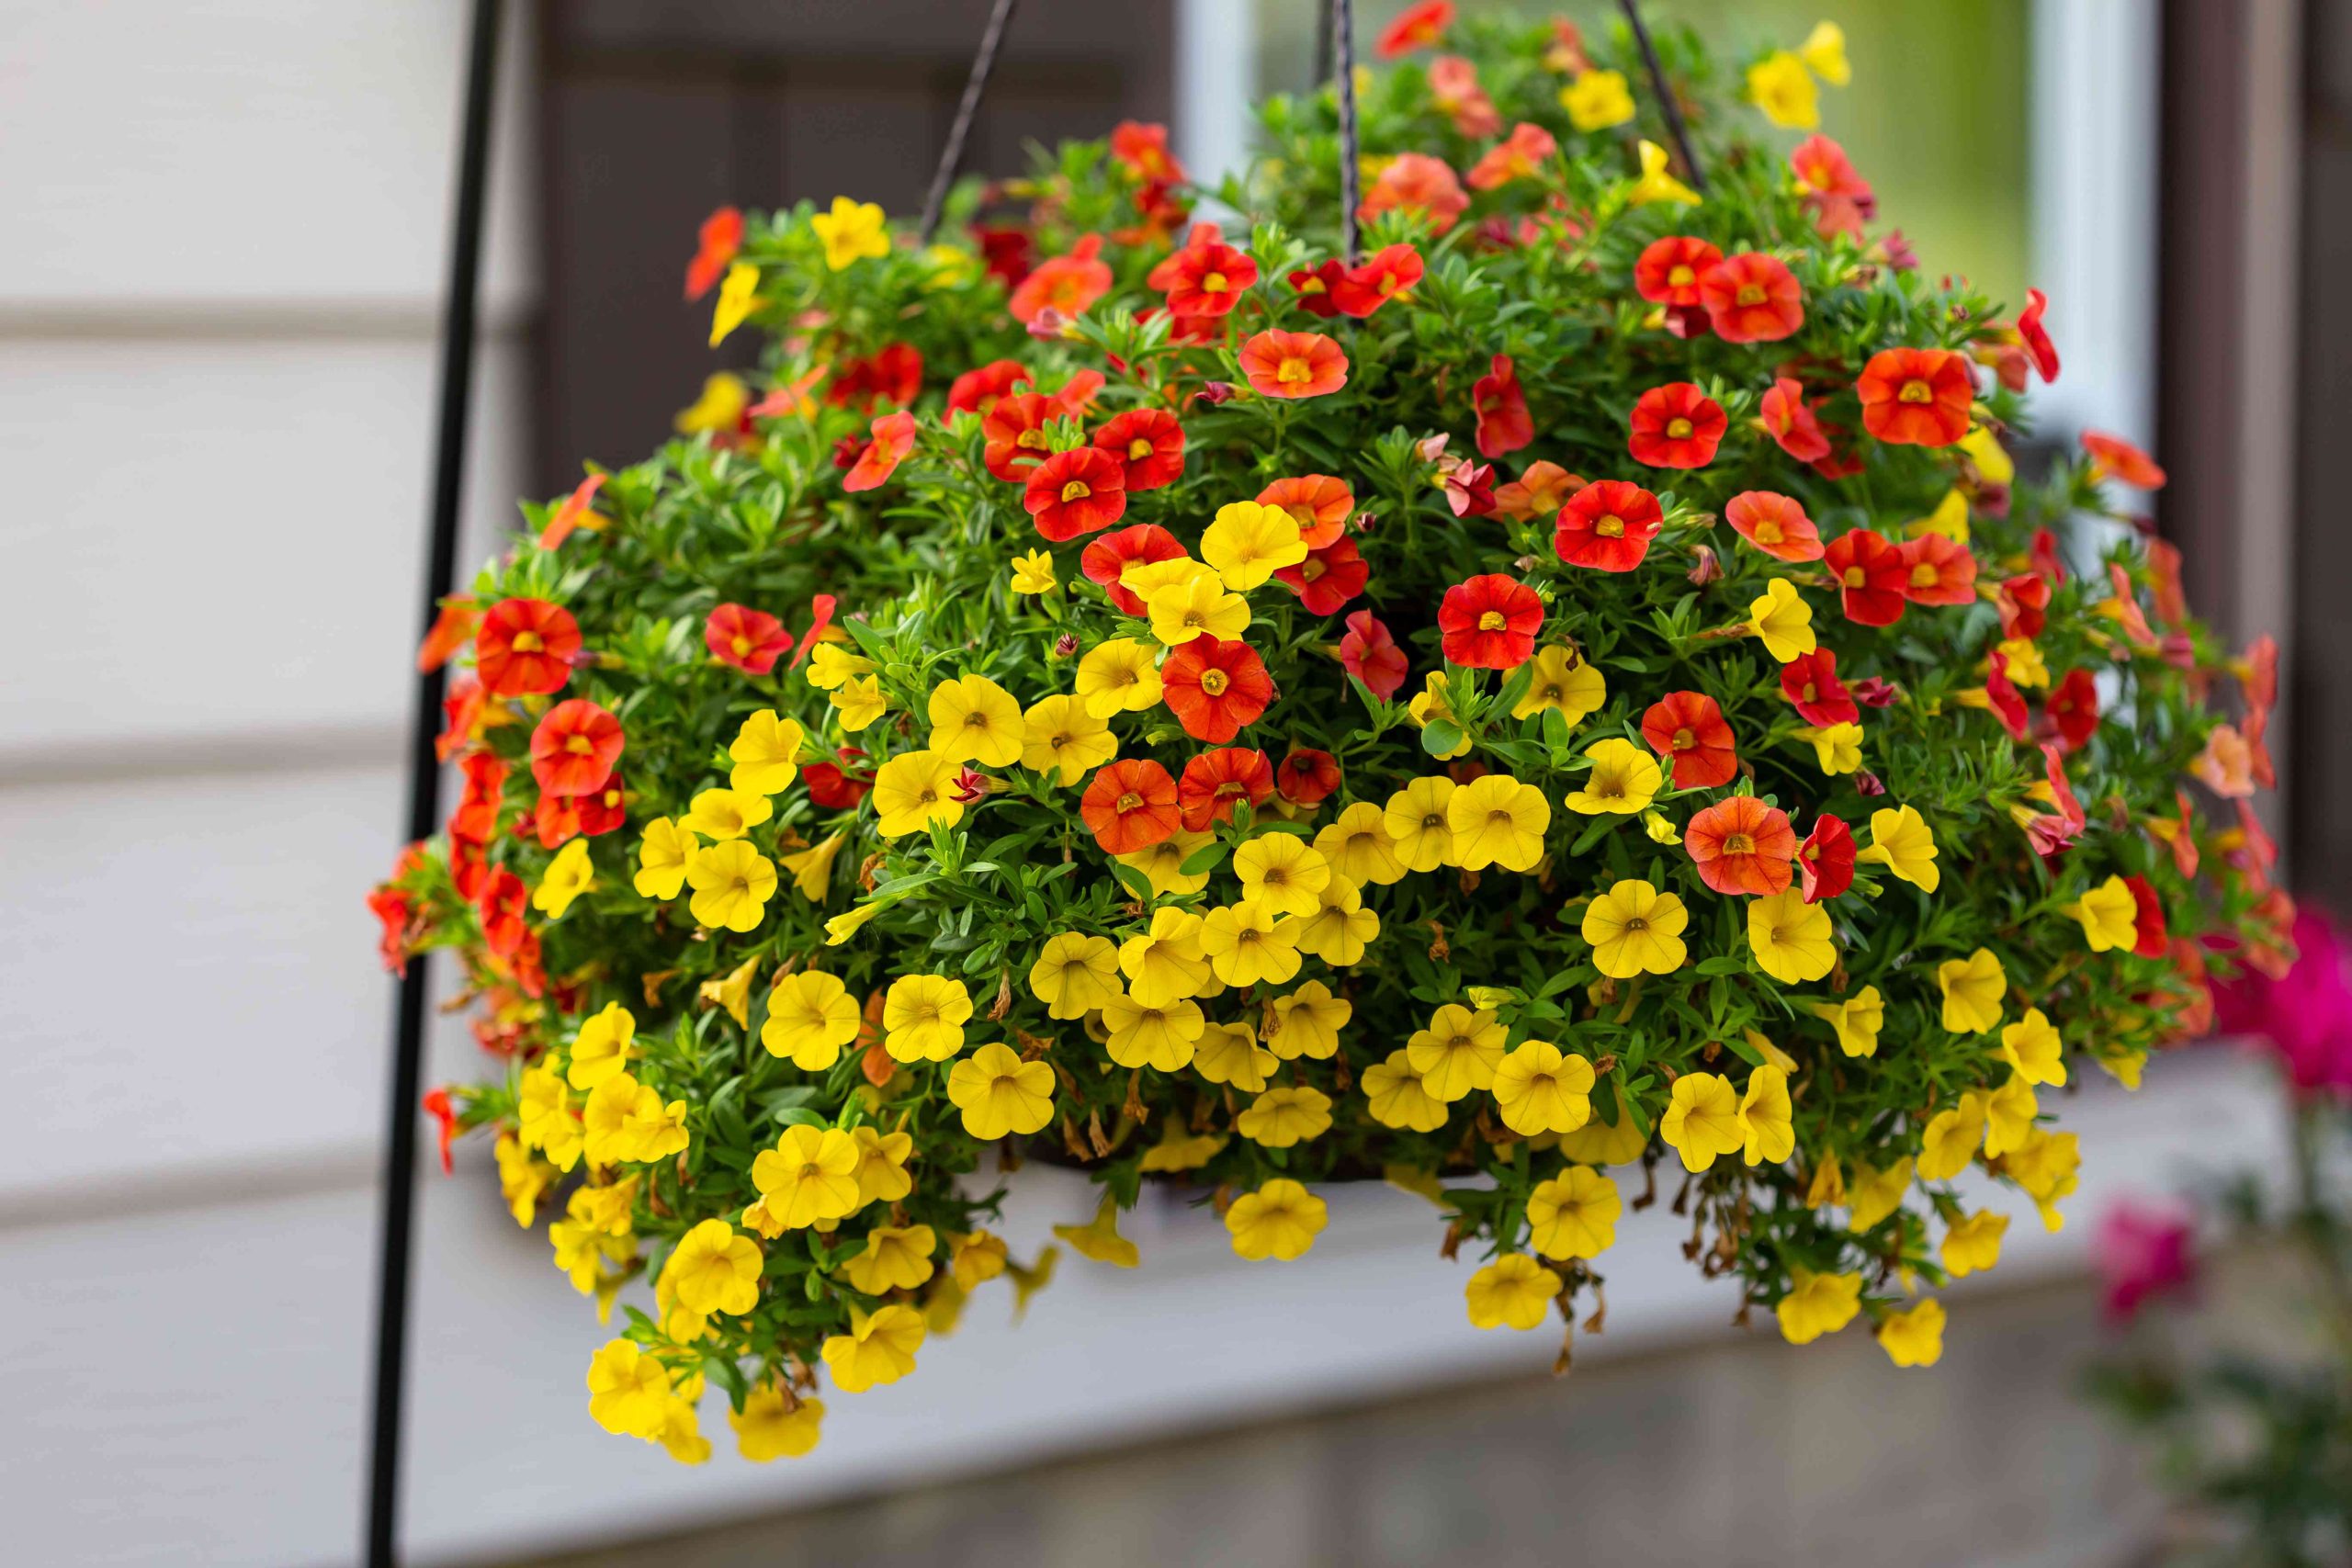 wide-view-of-a-hanging-basket-of-million-bells-flowers-1157114890-536a70b0ca6b467bae0c4709fb5bee88